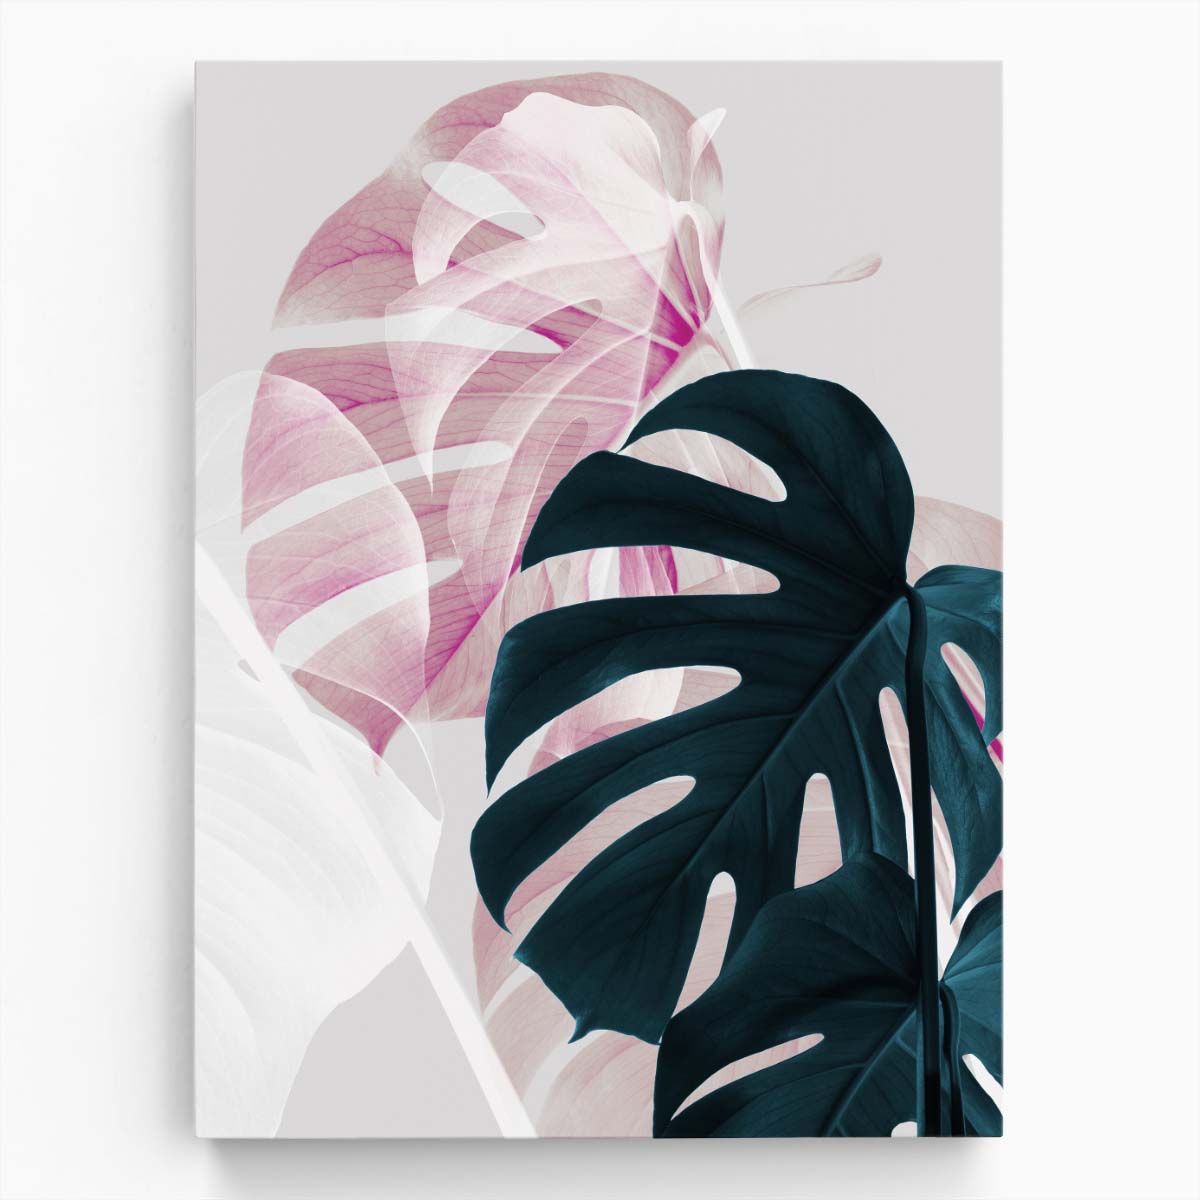 1XStudio Monstera Leaf Photography Botanical Wall Art in Pink & Green by Luxuriance Designs, made in USA